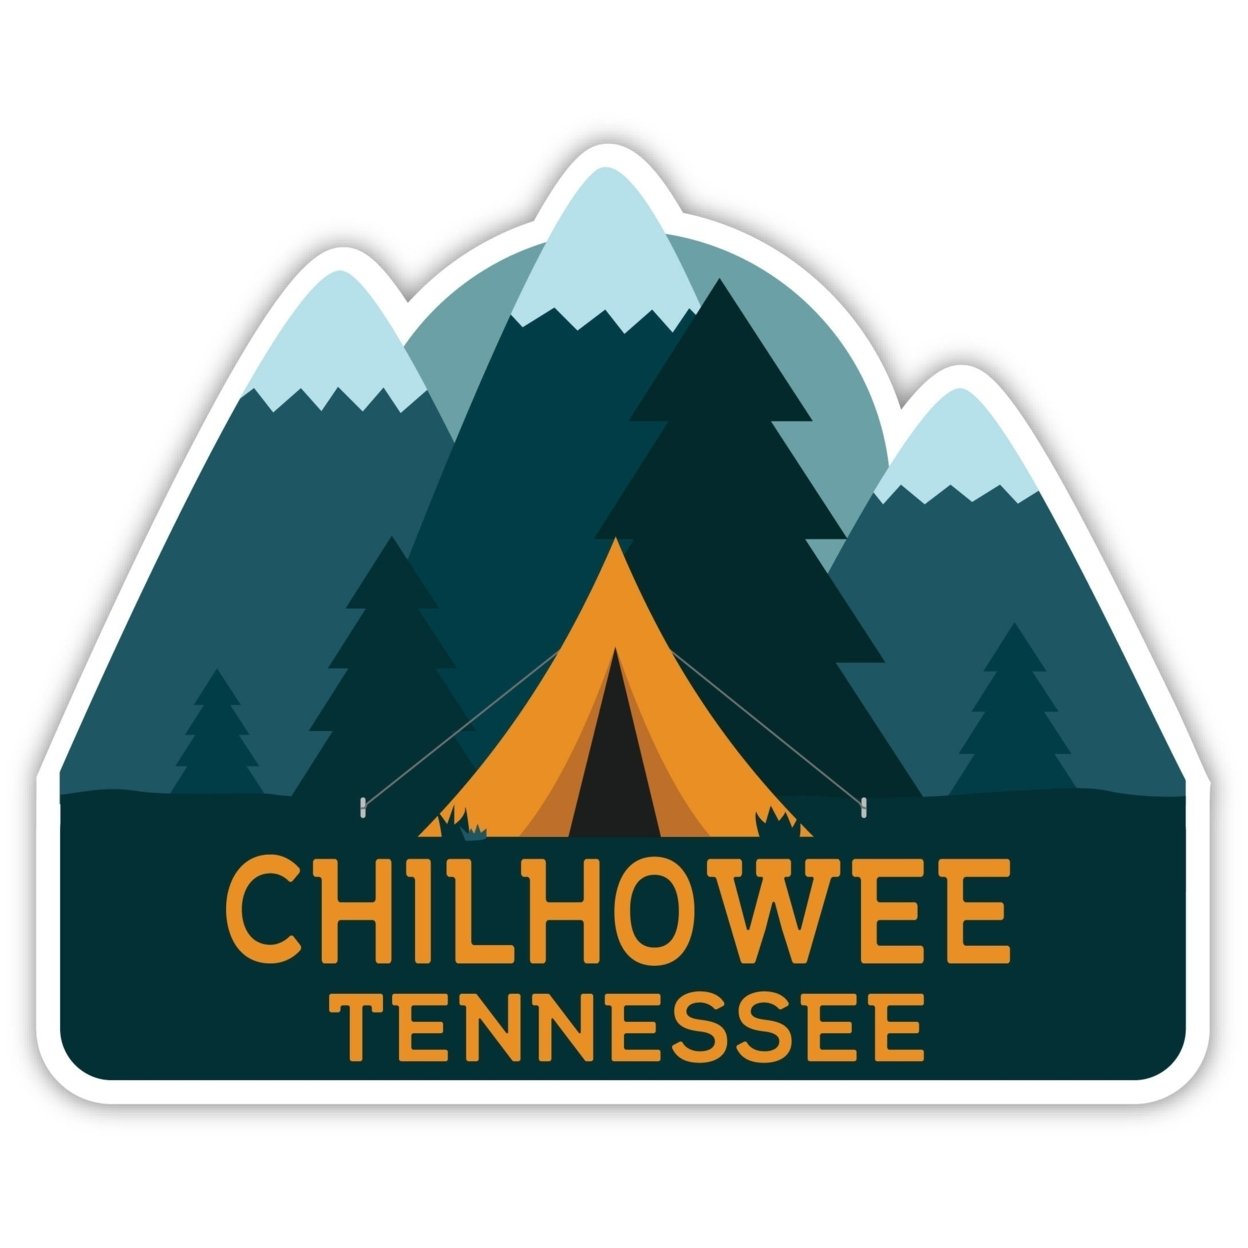 Chilhowee Tennessee Souvenir Decorative Stickers (Choose Theme And Size) - 4-Pack, 2-Inch, Tent